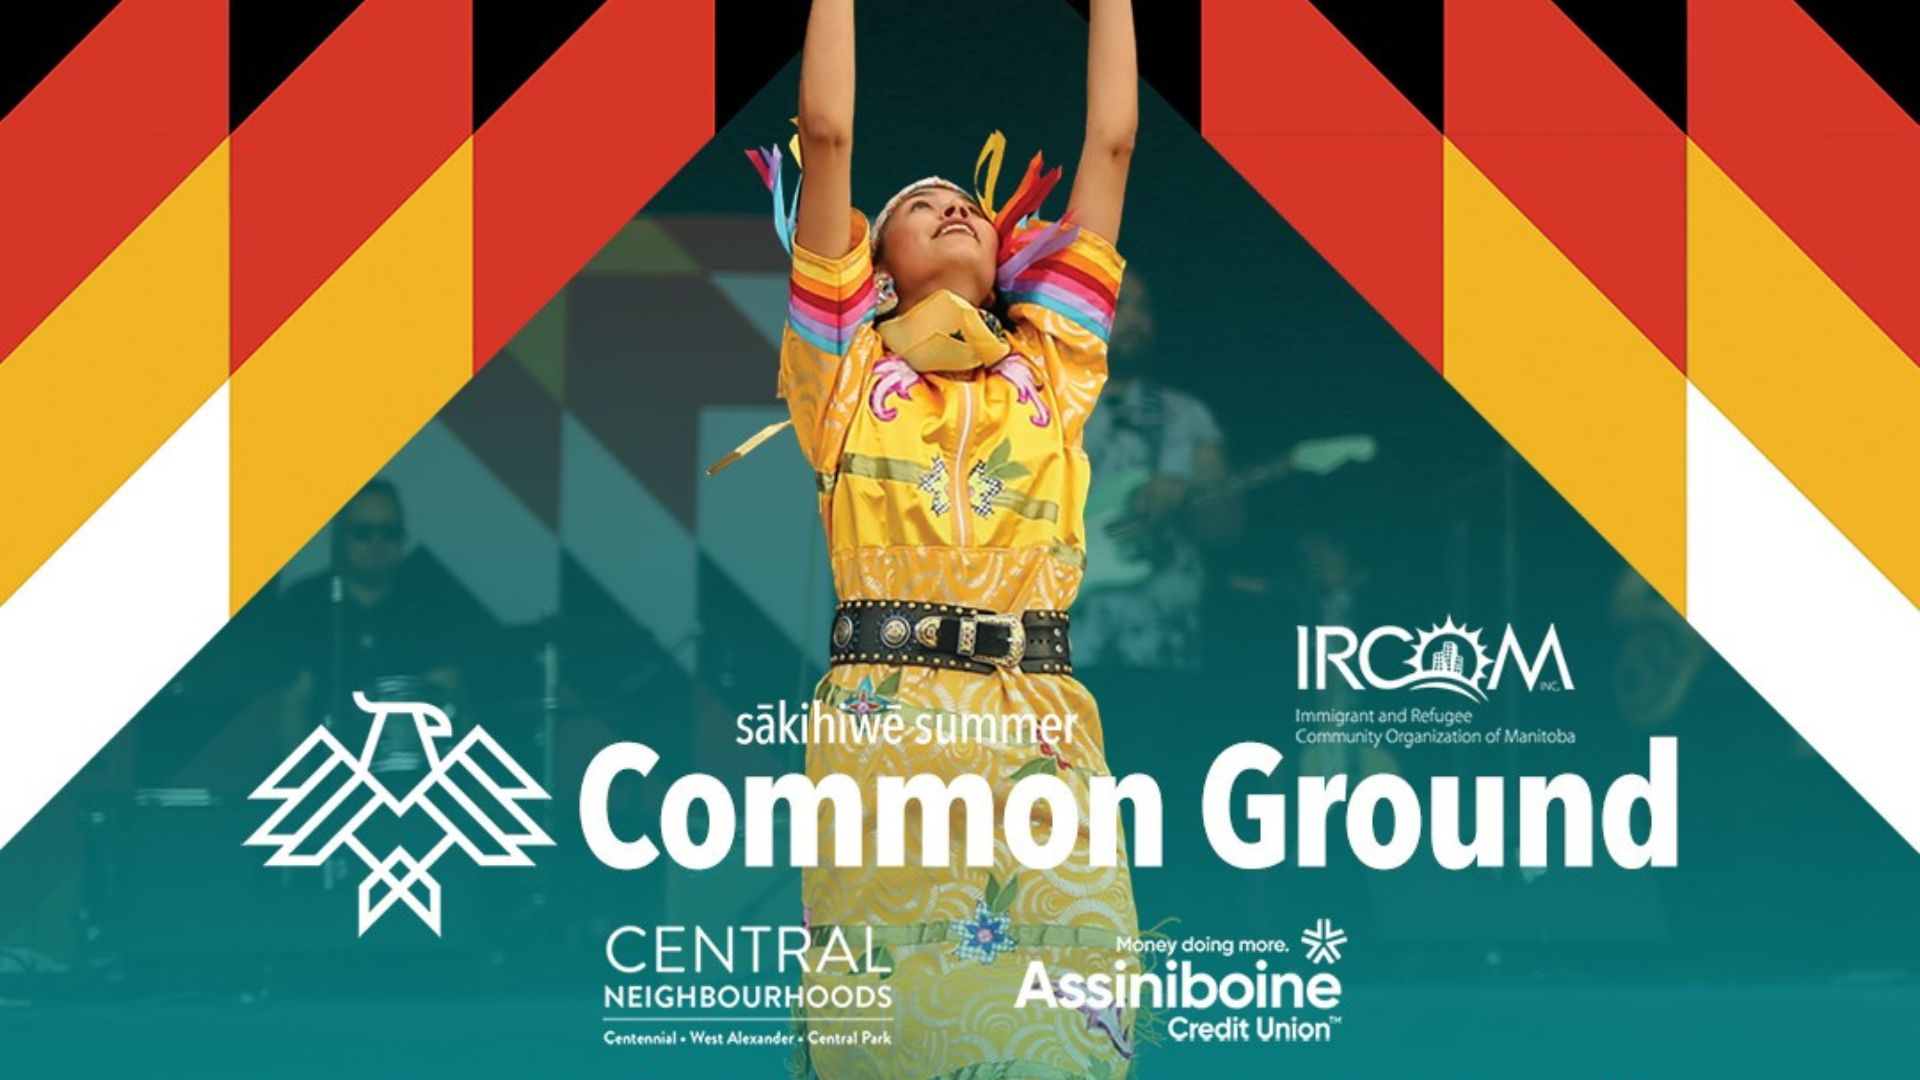 Experience the Common Ground Concert